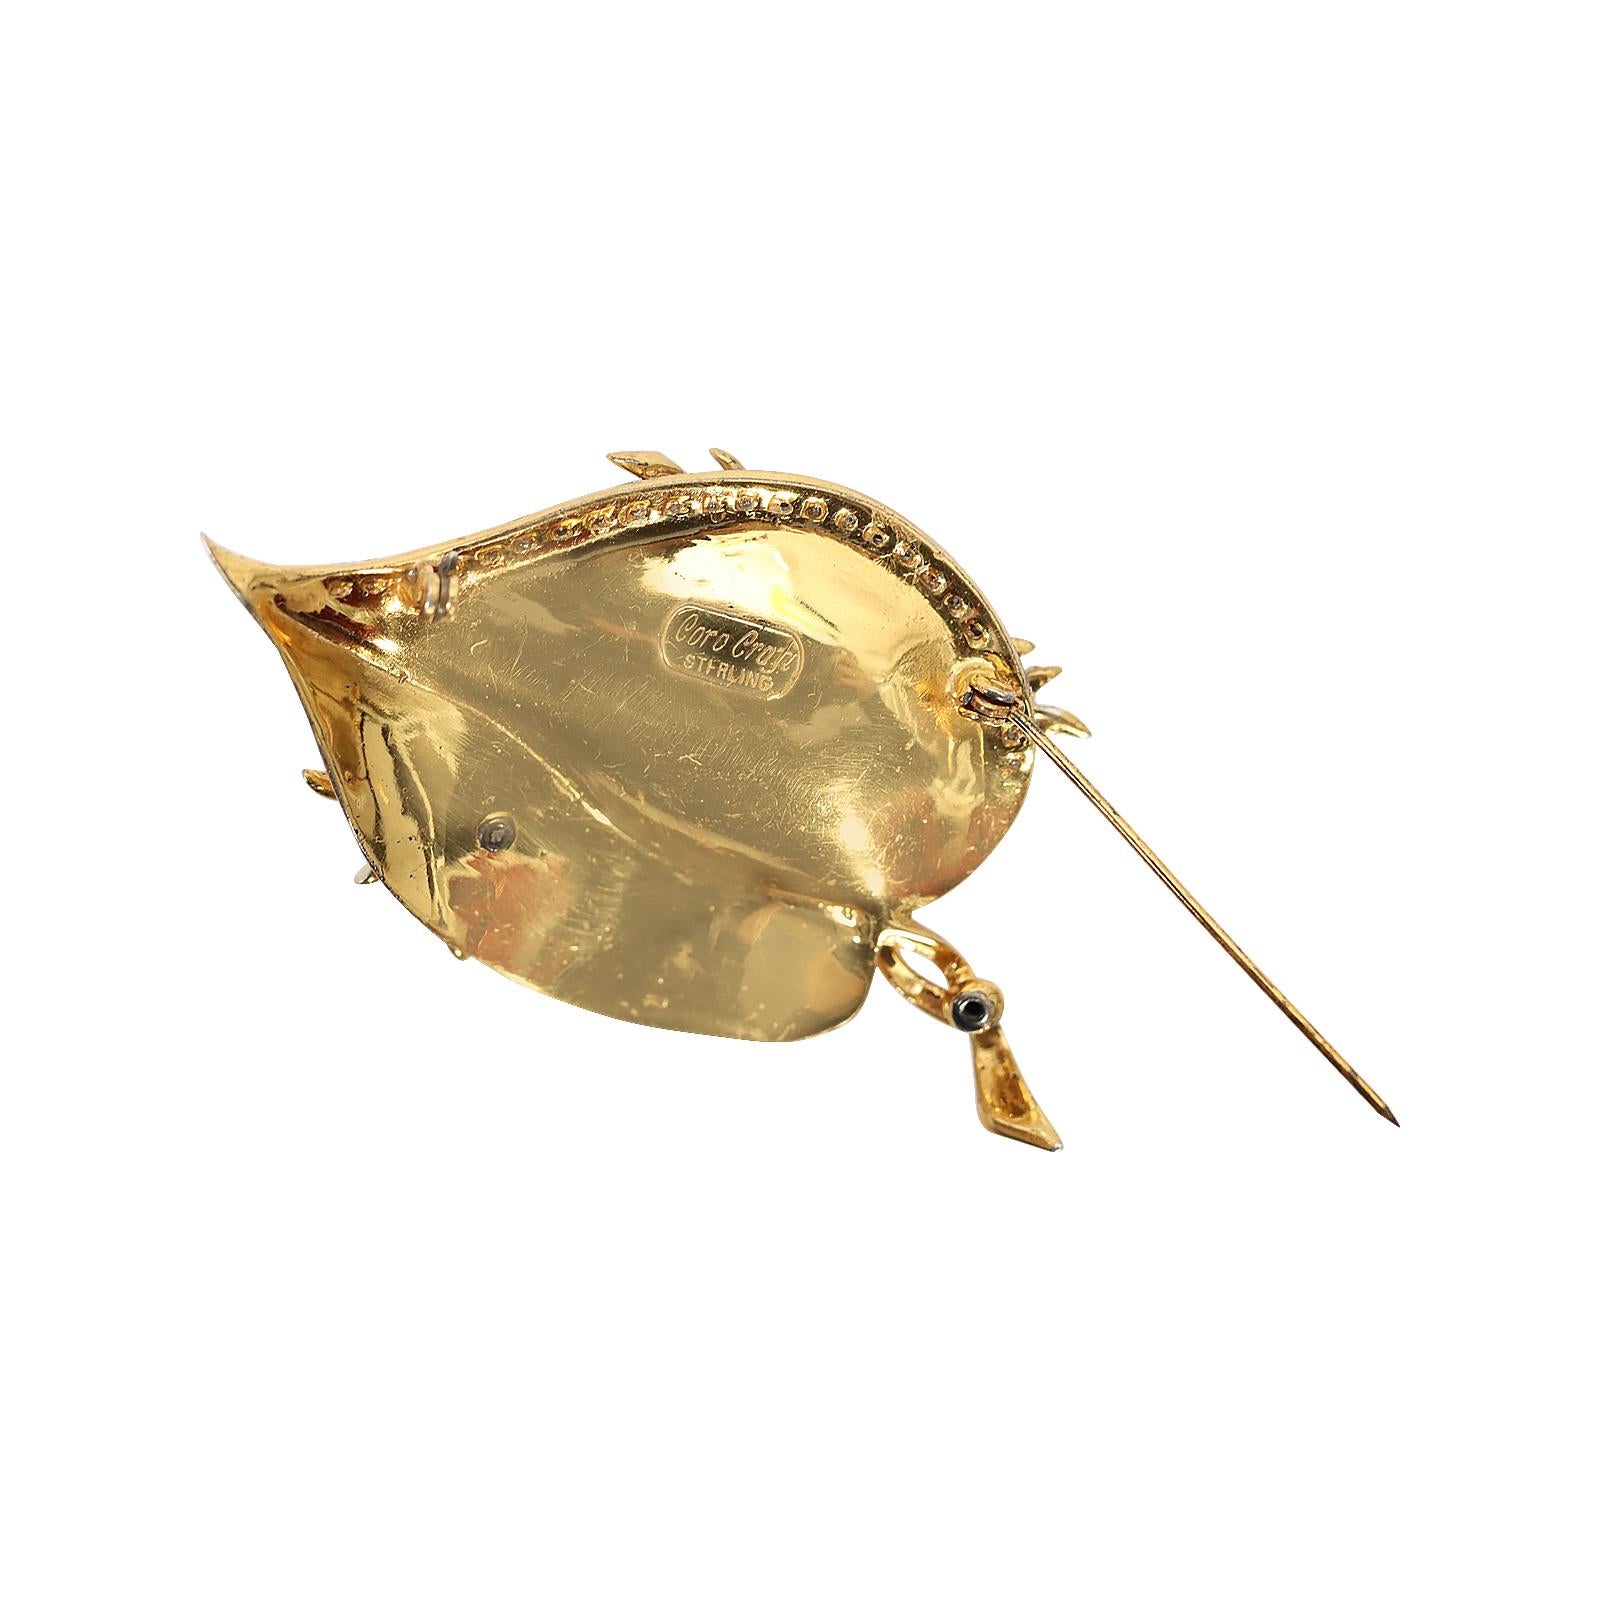 Modern Vintage Coro Craft Sterling Gold Leaf Brooch with Flowers Circa 1940s For Sale